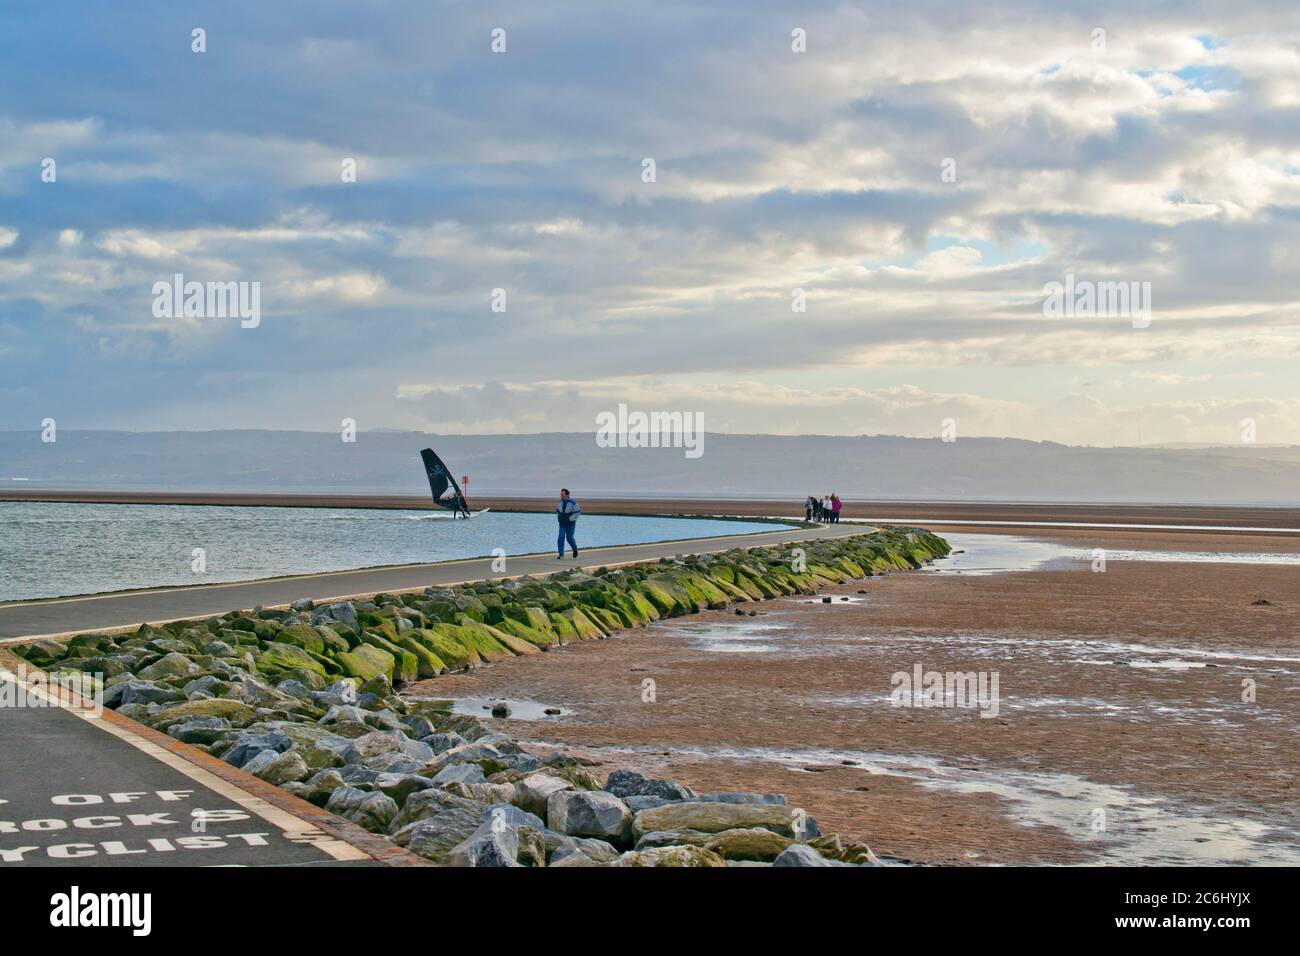 Planche à voile, West Kirby, Wirral, Angleterre, royaume-uni Banque D'Images